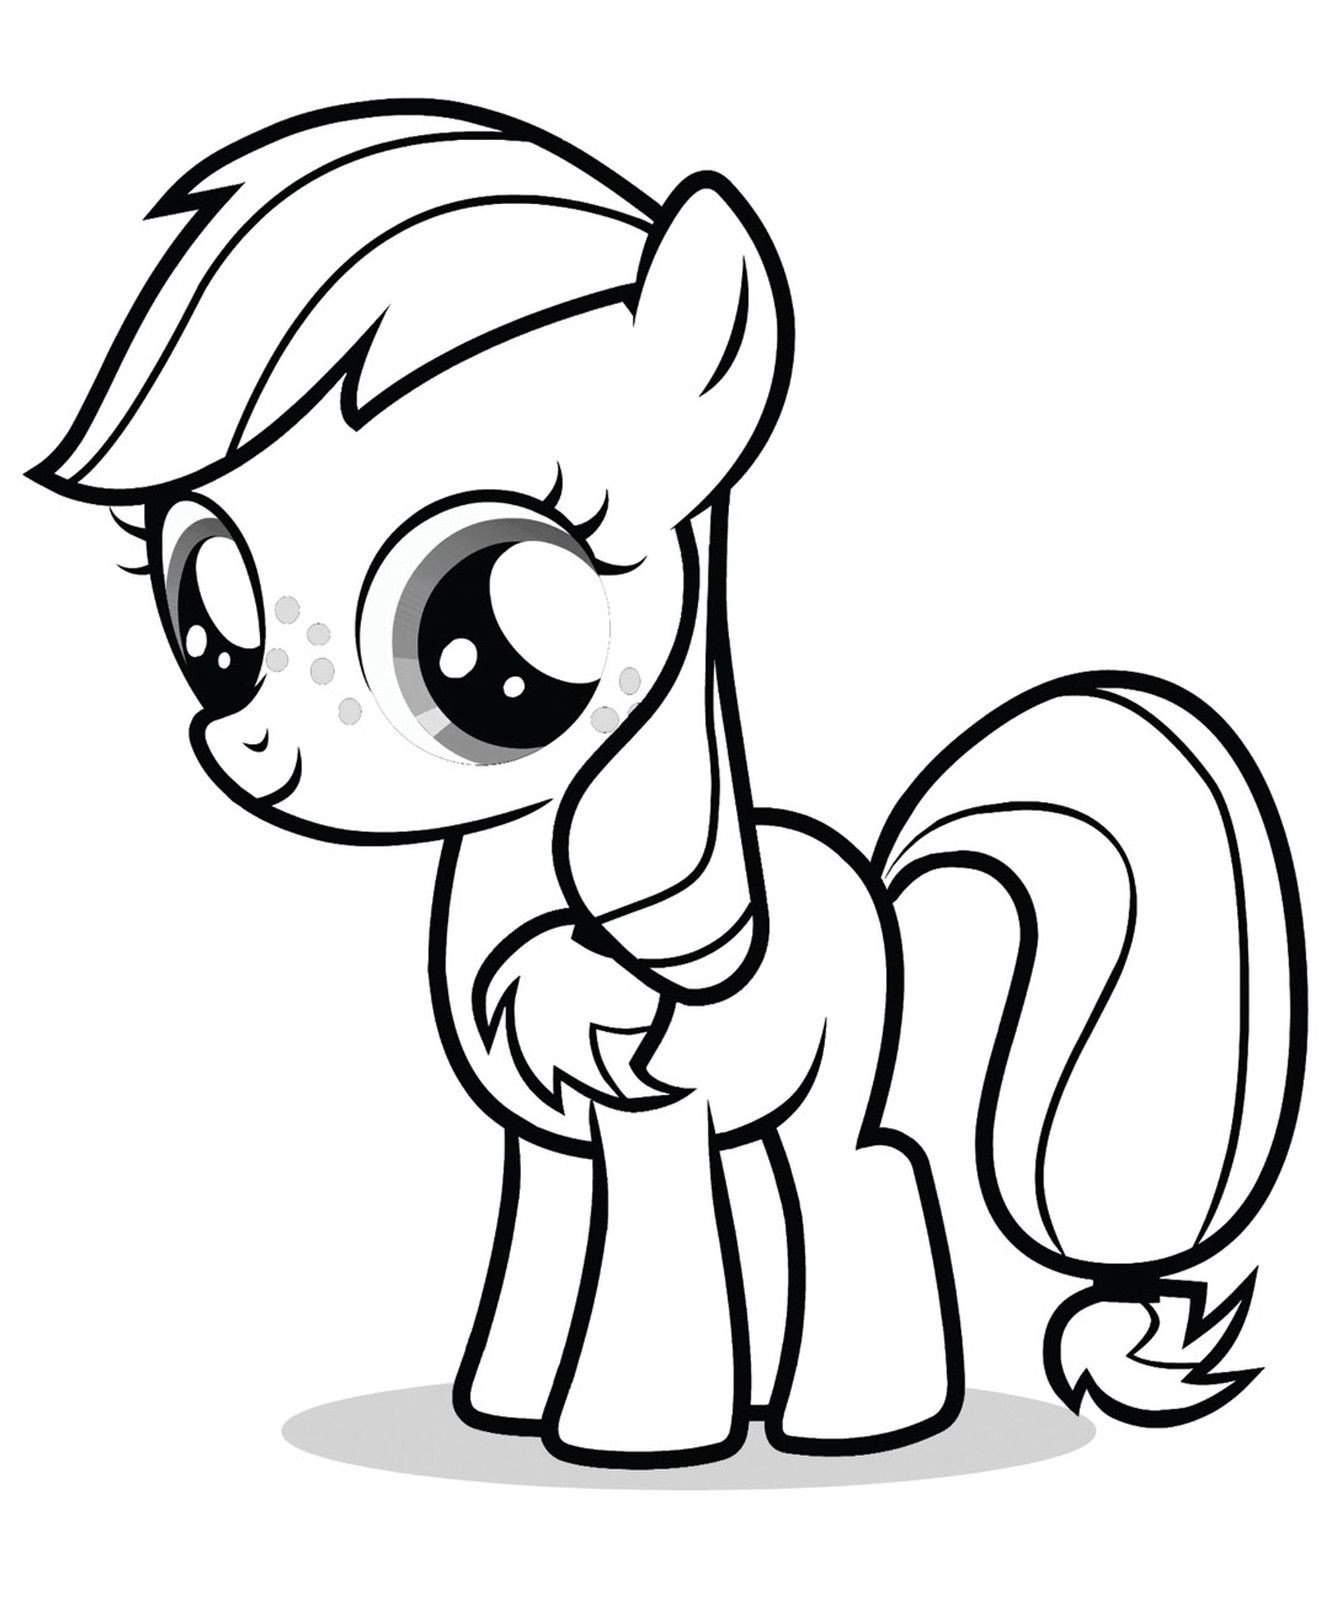 Kids Coloring Pages My Little Pony
 My little pony coloring pages